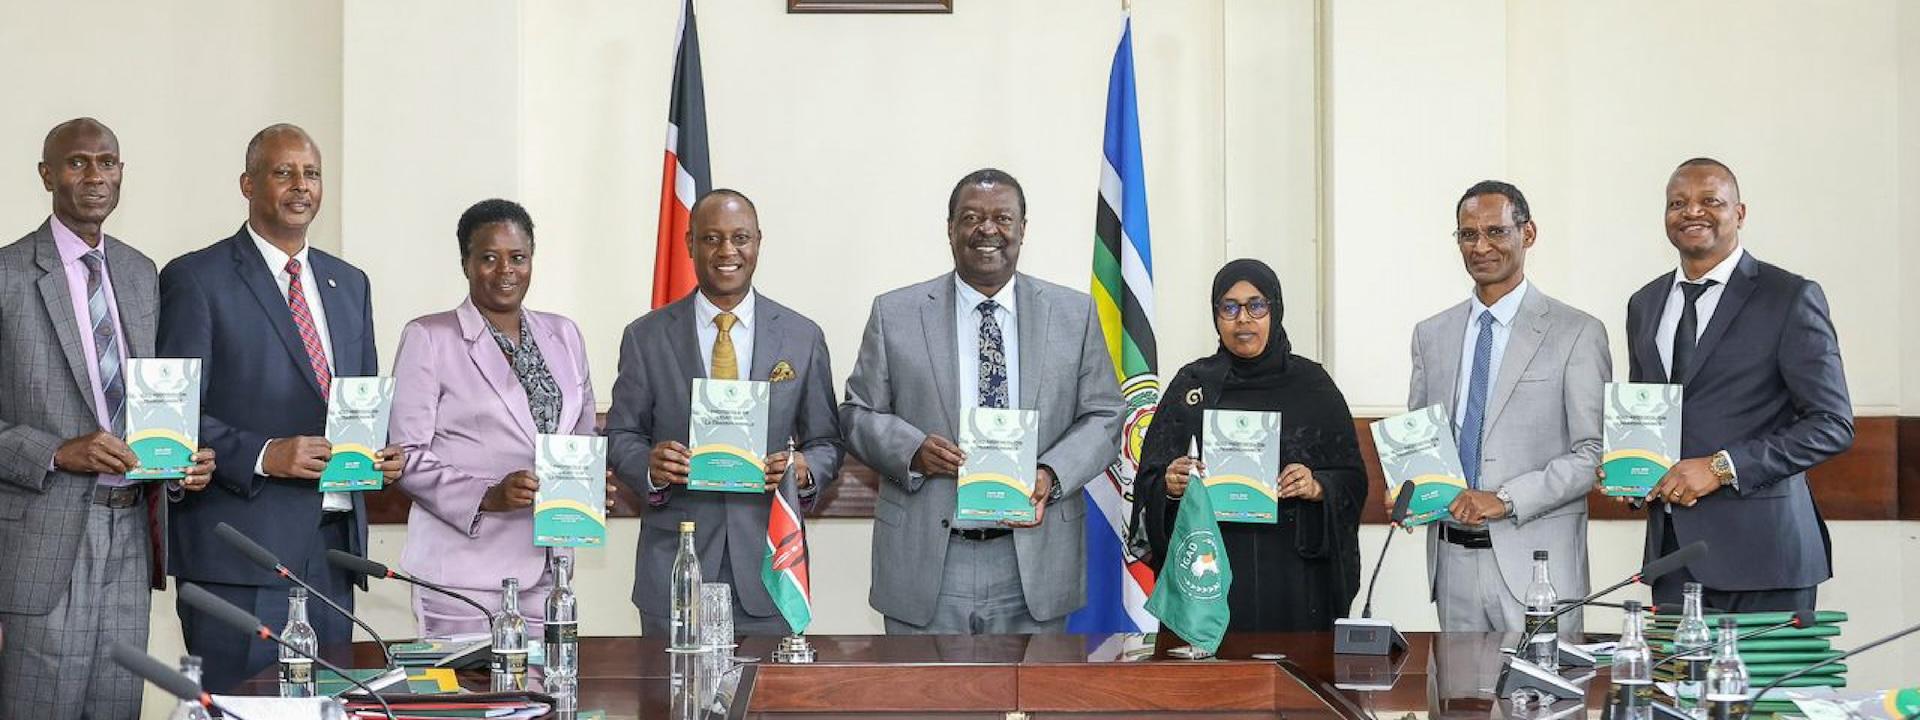 Kenya Signs the IGAD Free Movement of Persons Protocol